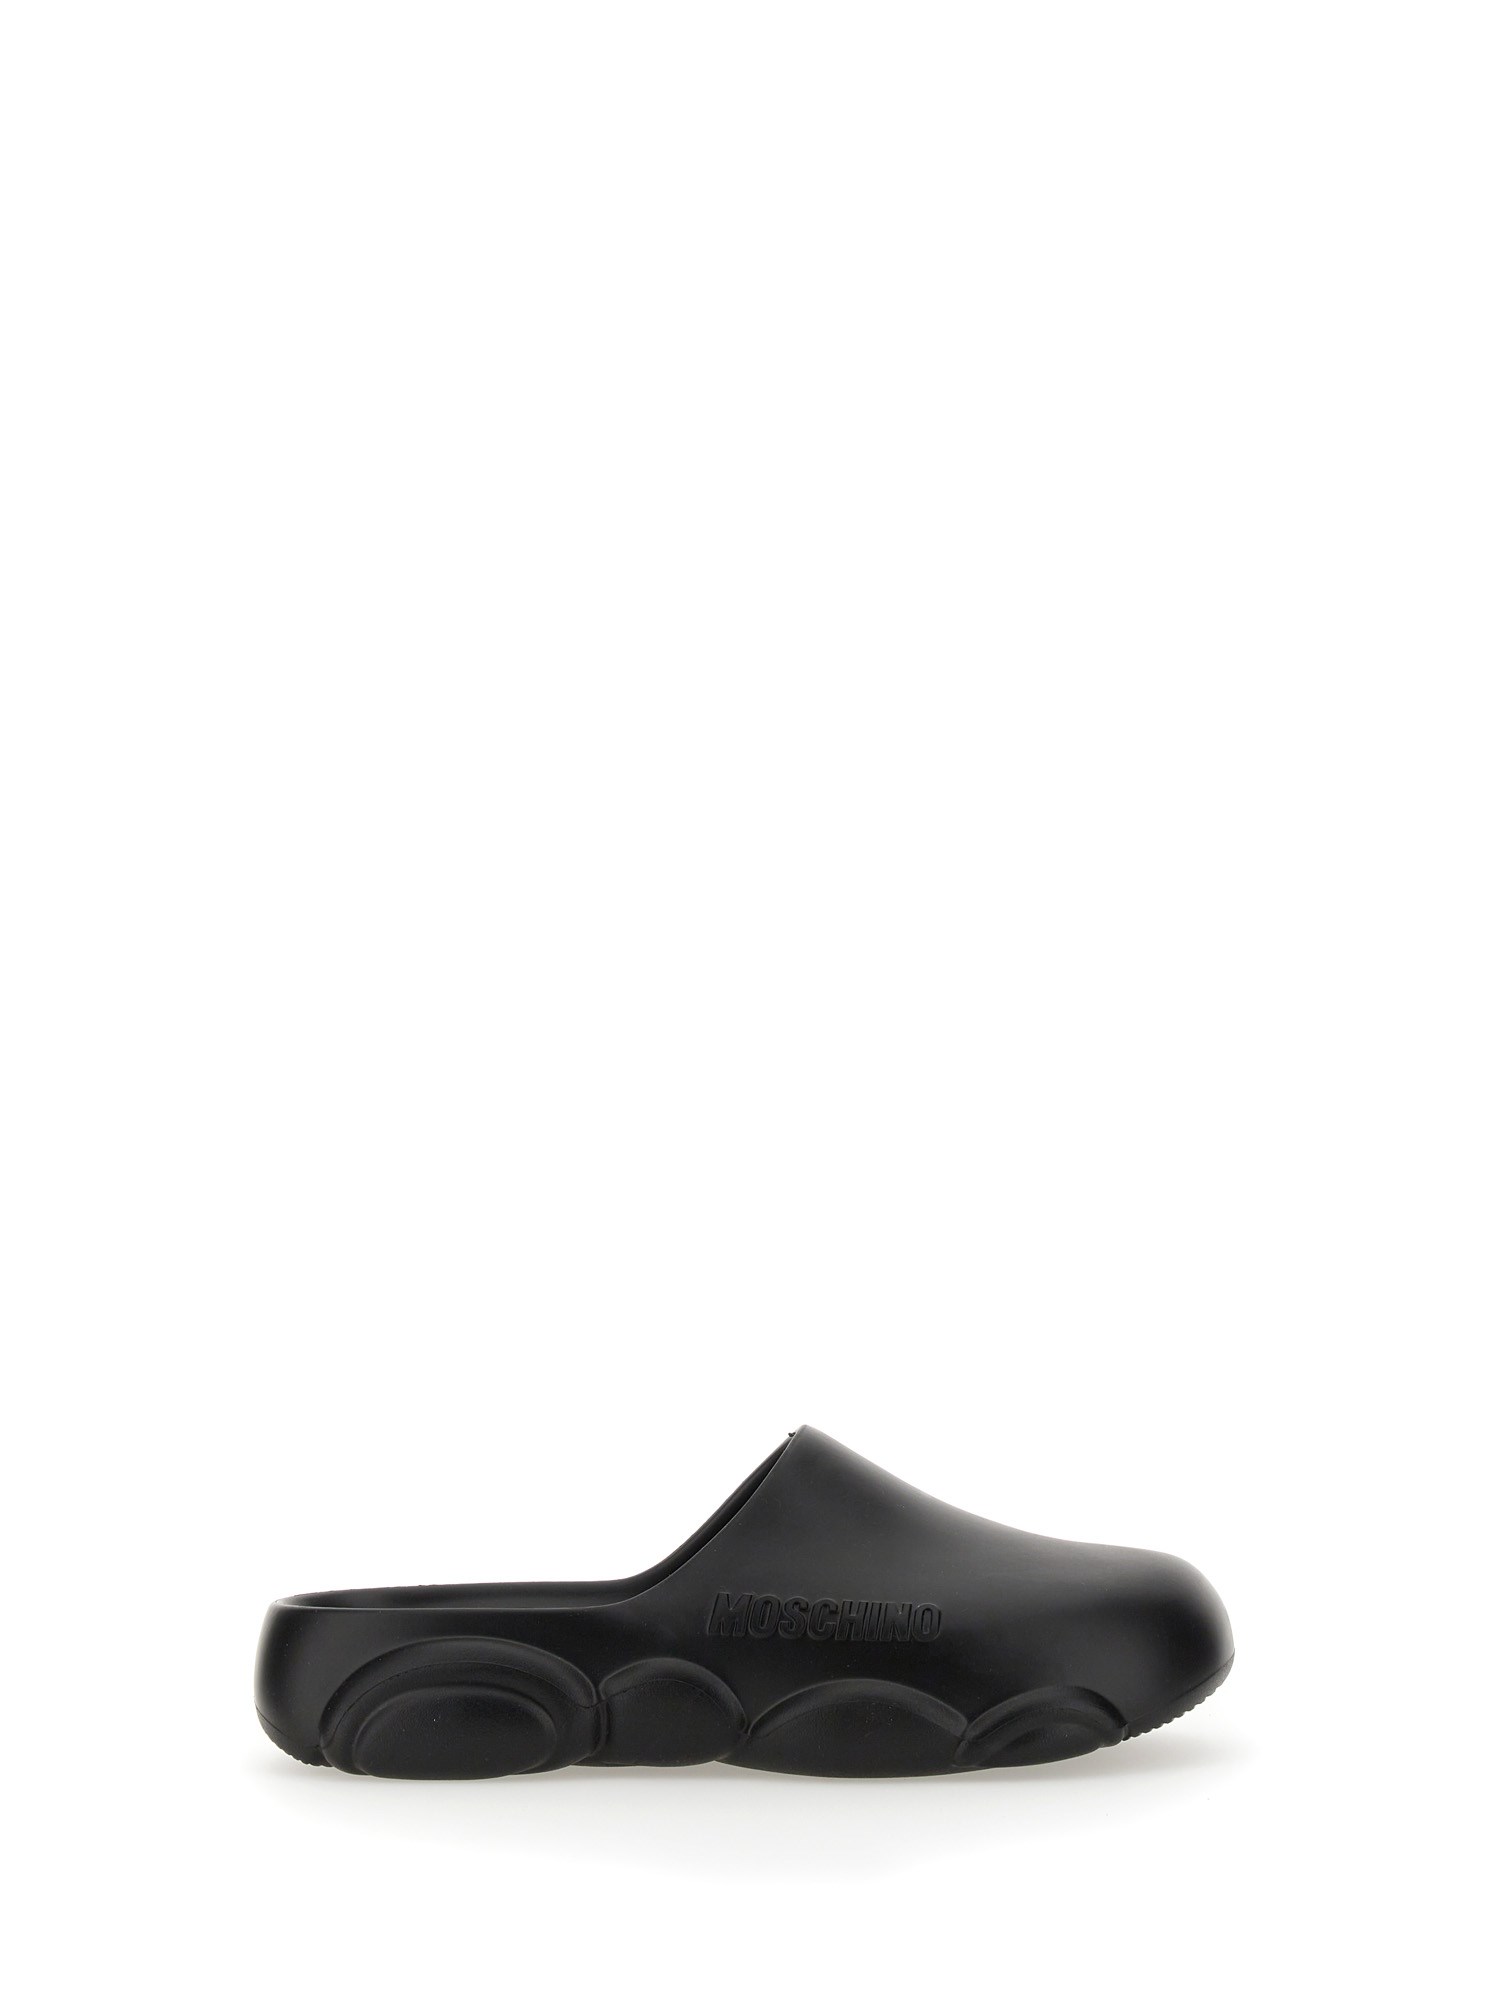 moschino rubber teddy sole mules